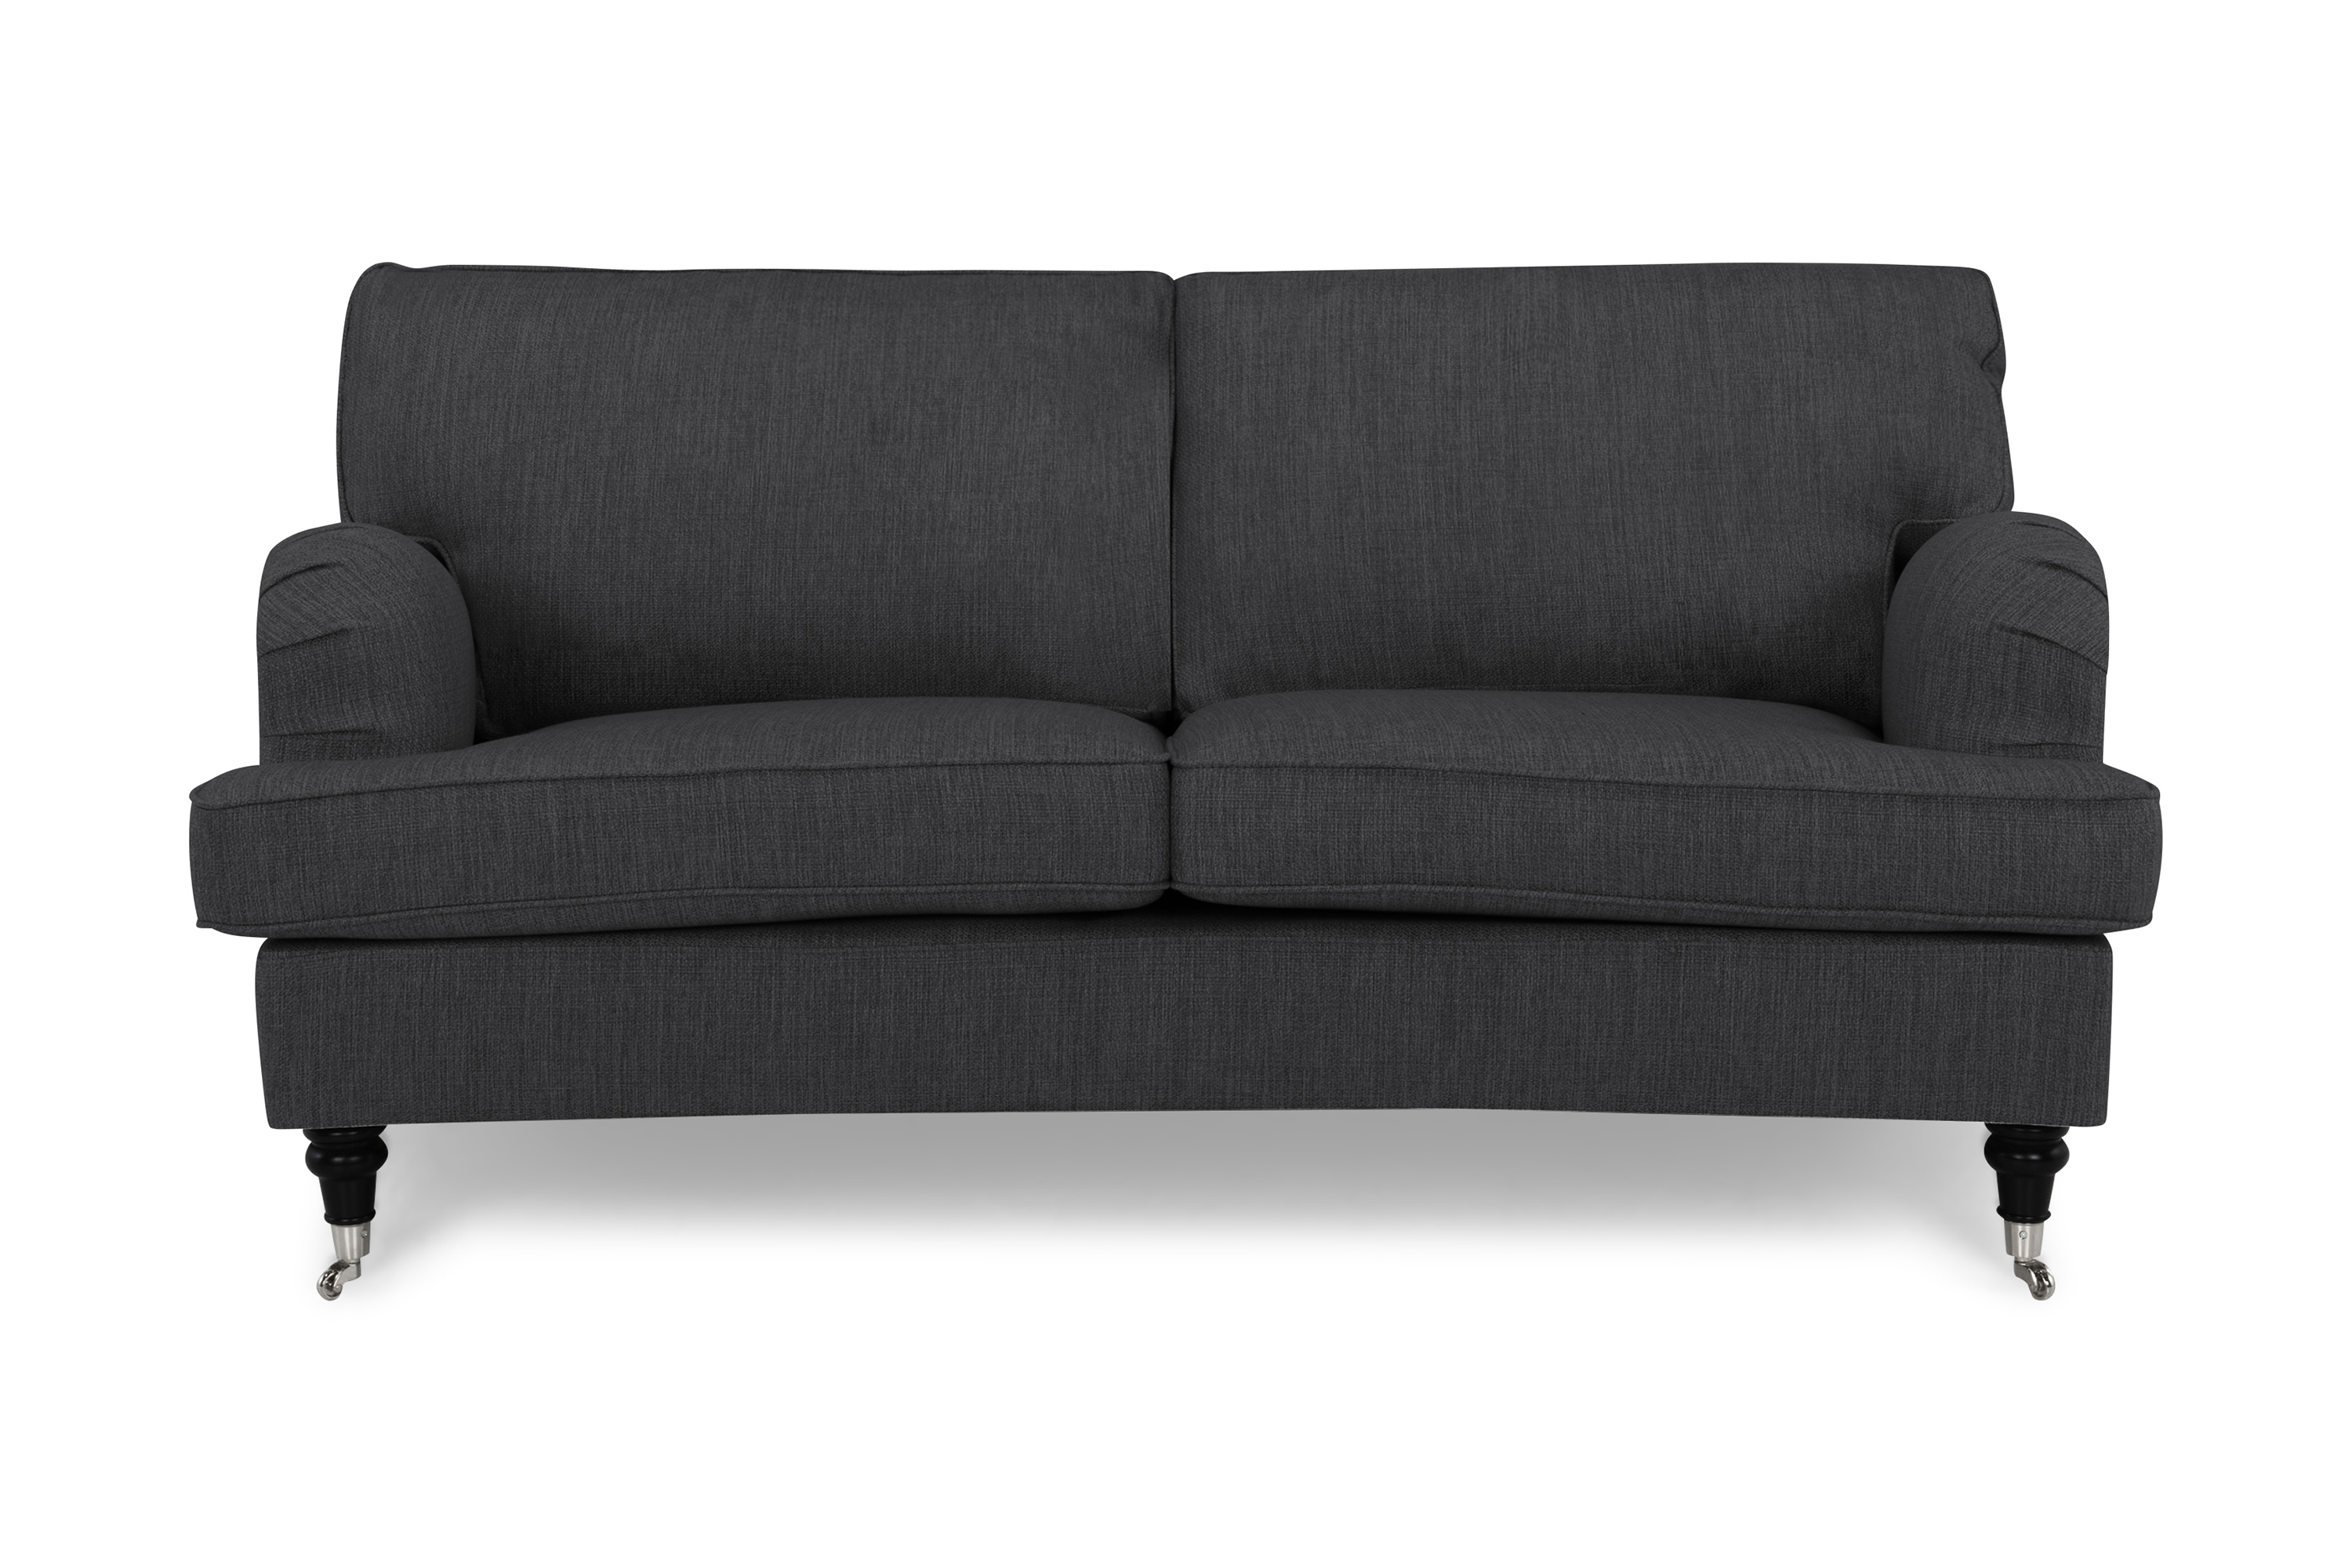 Andrarum Howard Classic 2-sits Soffa Svängd - Antracit 220-10-143101